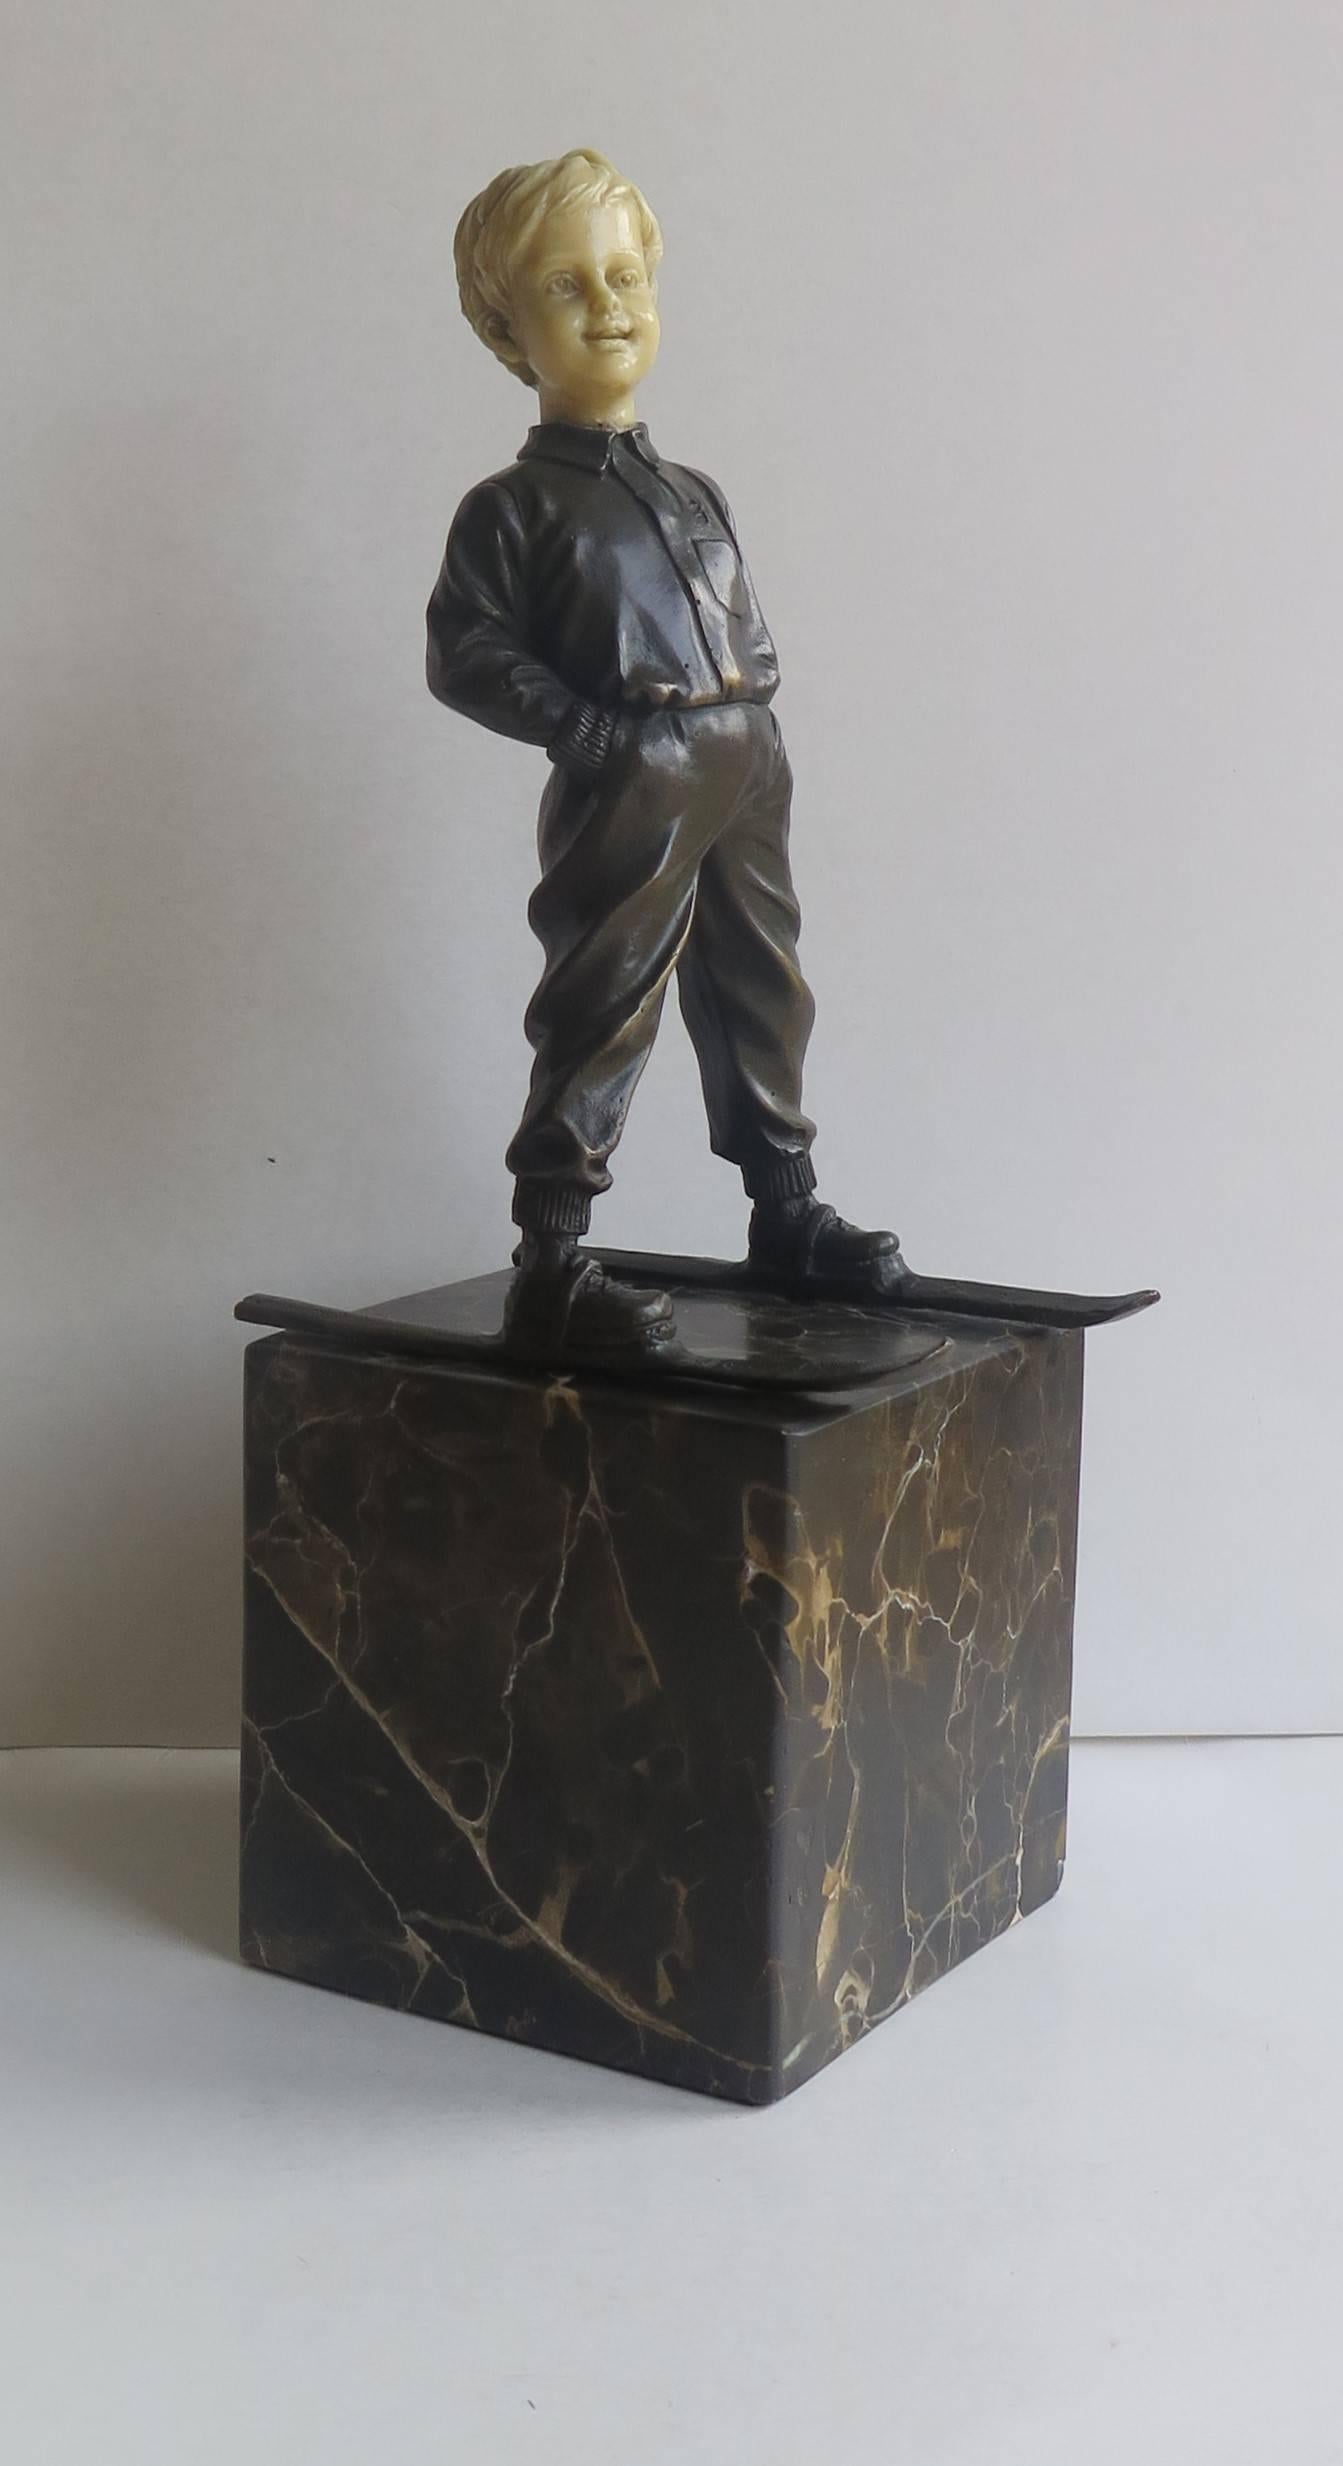 This is a good quality, figurative metal sculpture. 

This Art Deco style figurine depicts a boy wearing ski’s stood with his hands in his pockets. The figure is made of bronze or spelter ( probably bronze) with the nicely detailed head made of